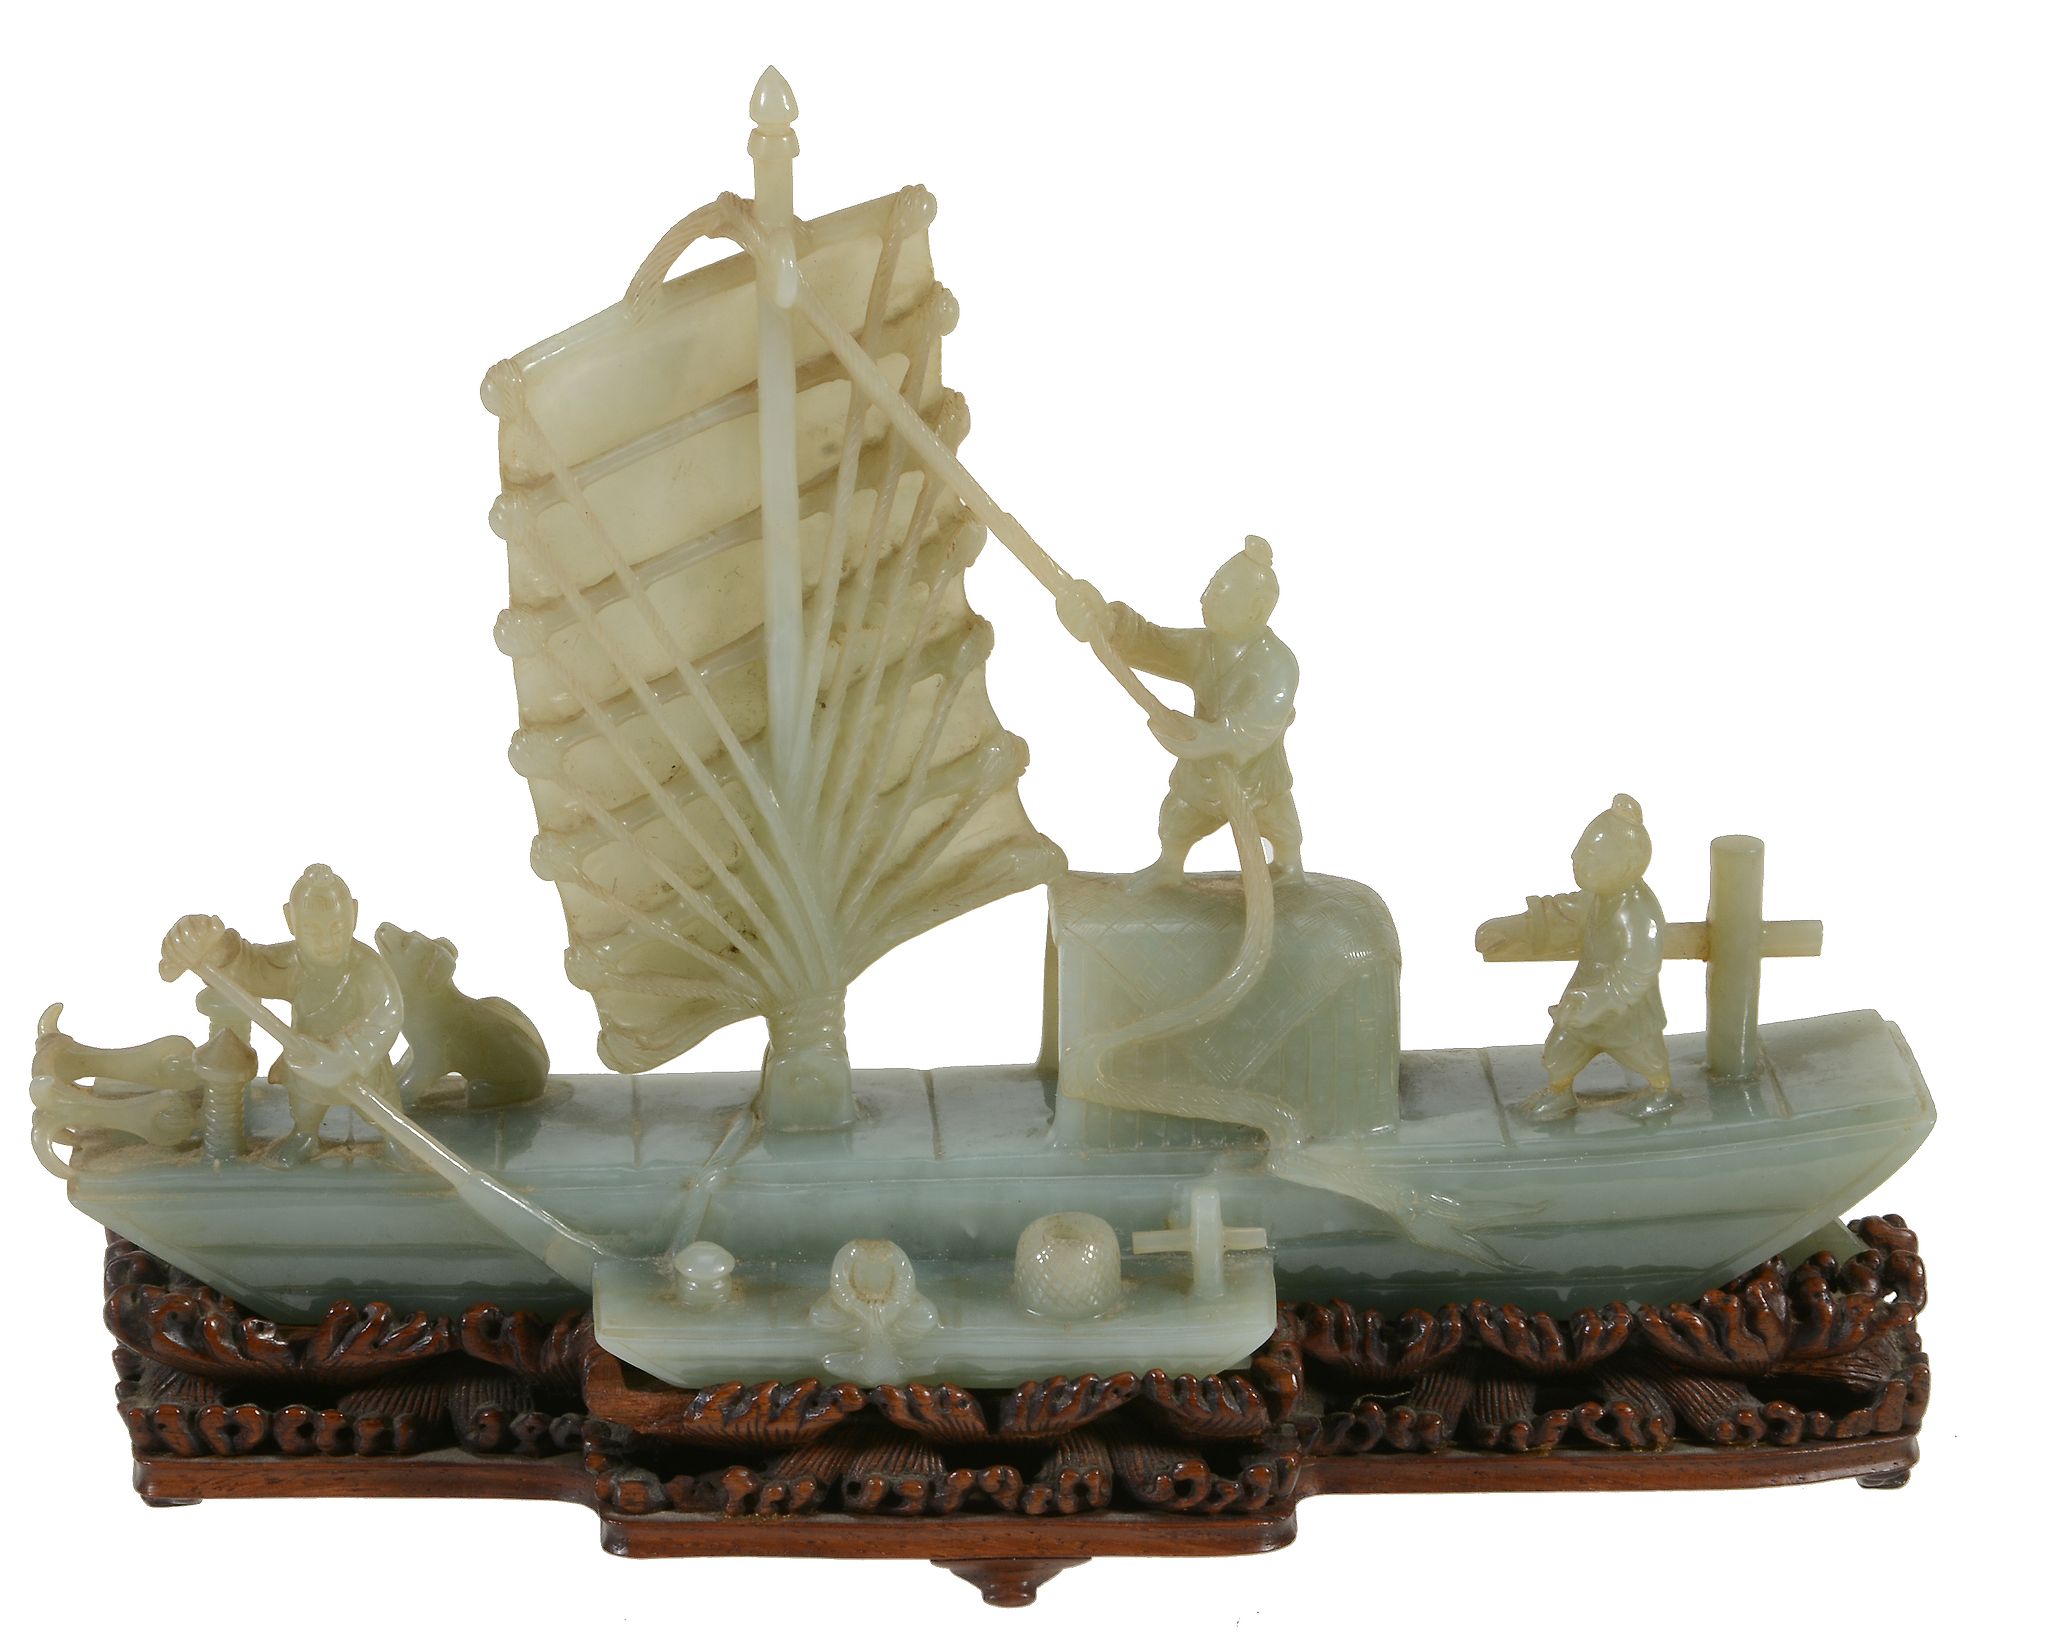 A jadeite model of a junk, 20th century, carved with three sailors on deck and a dog, the vessel